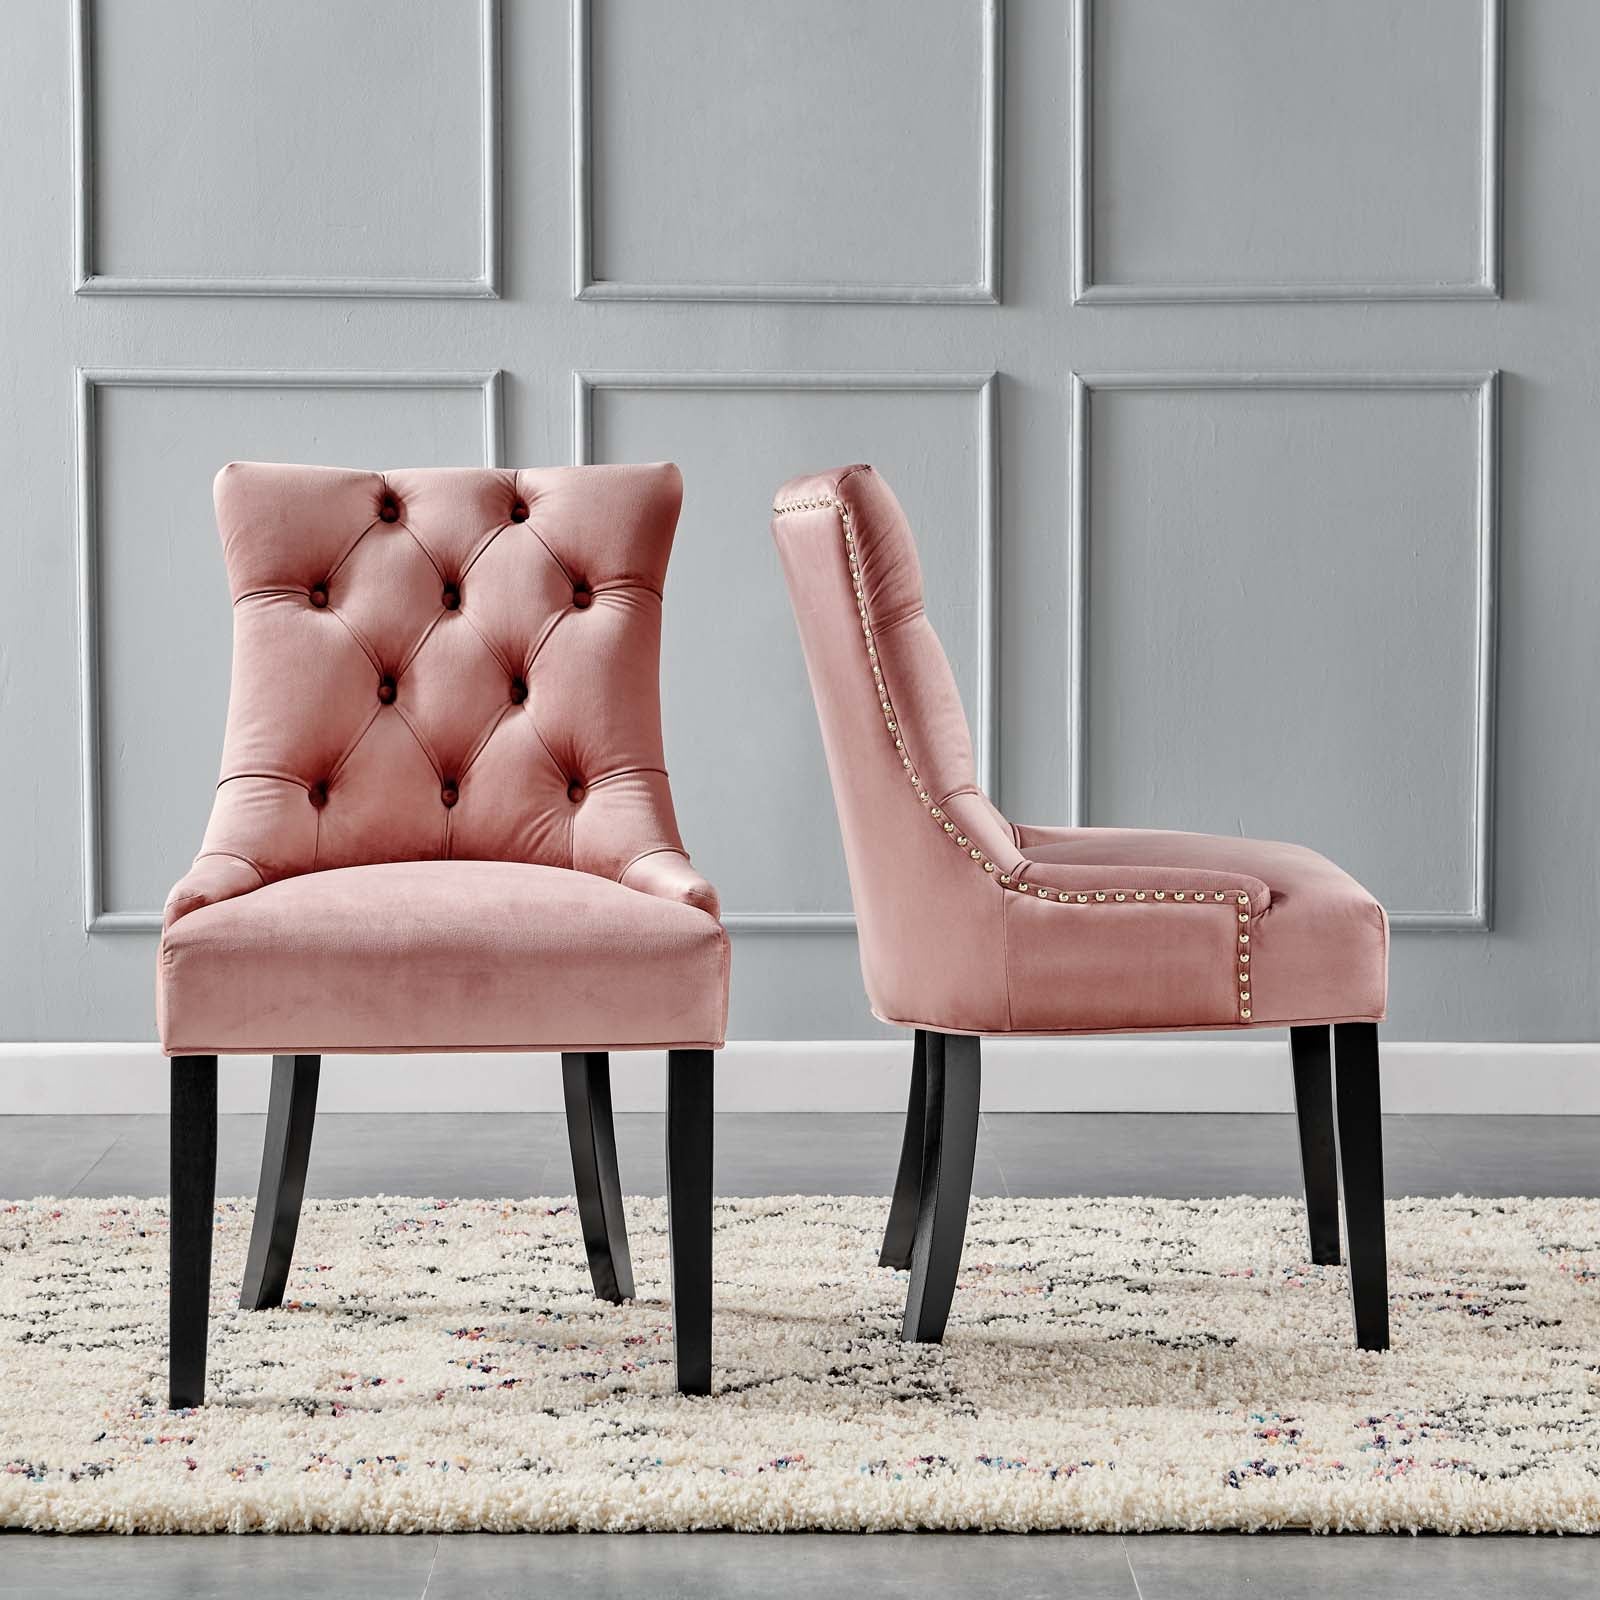 Modway Dining Chairs - Regent Tufted Performance Velvet Dining Side Chairs - ( Set of 2 ) Dusty Rose